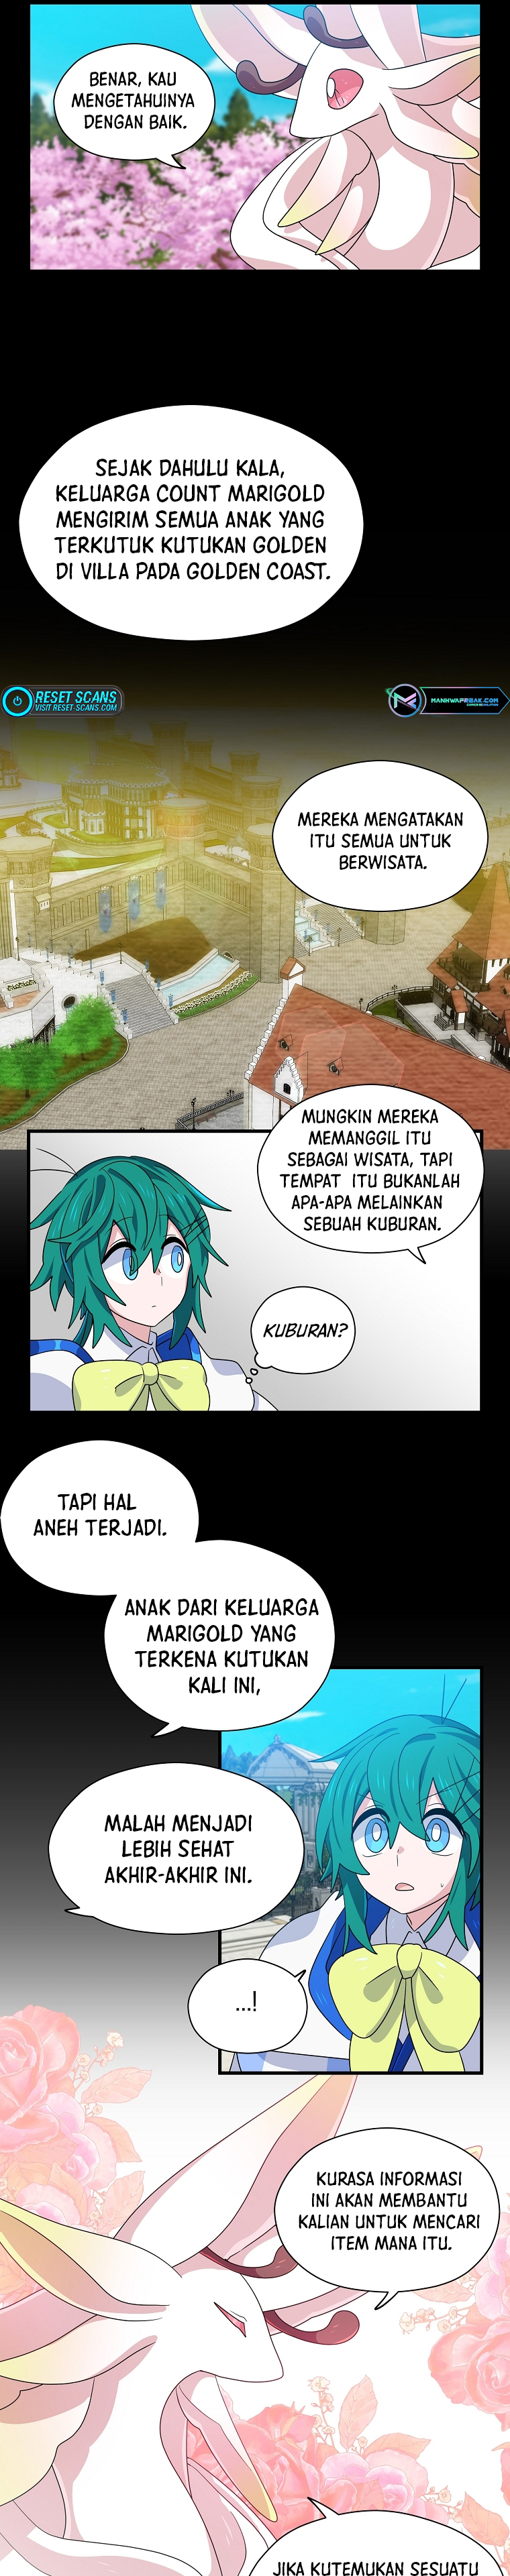 Asterisk The Dragon Walking on the Milky Way Chapter 8